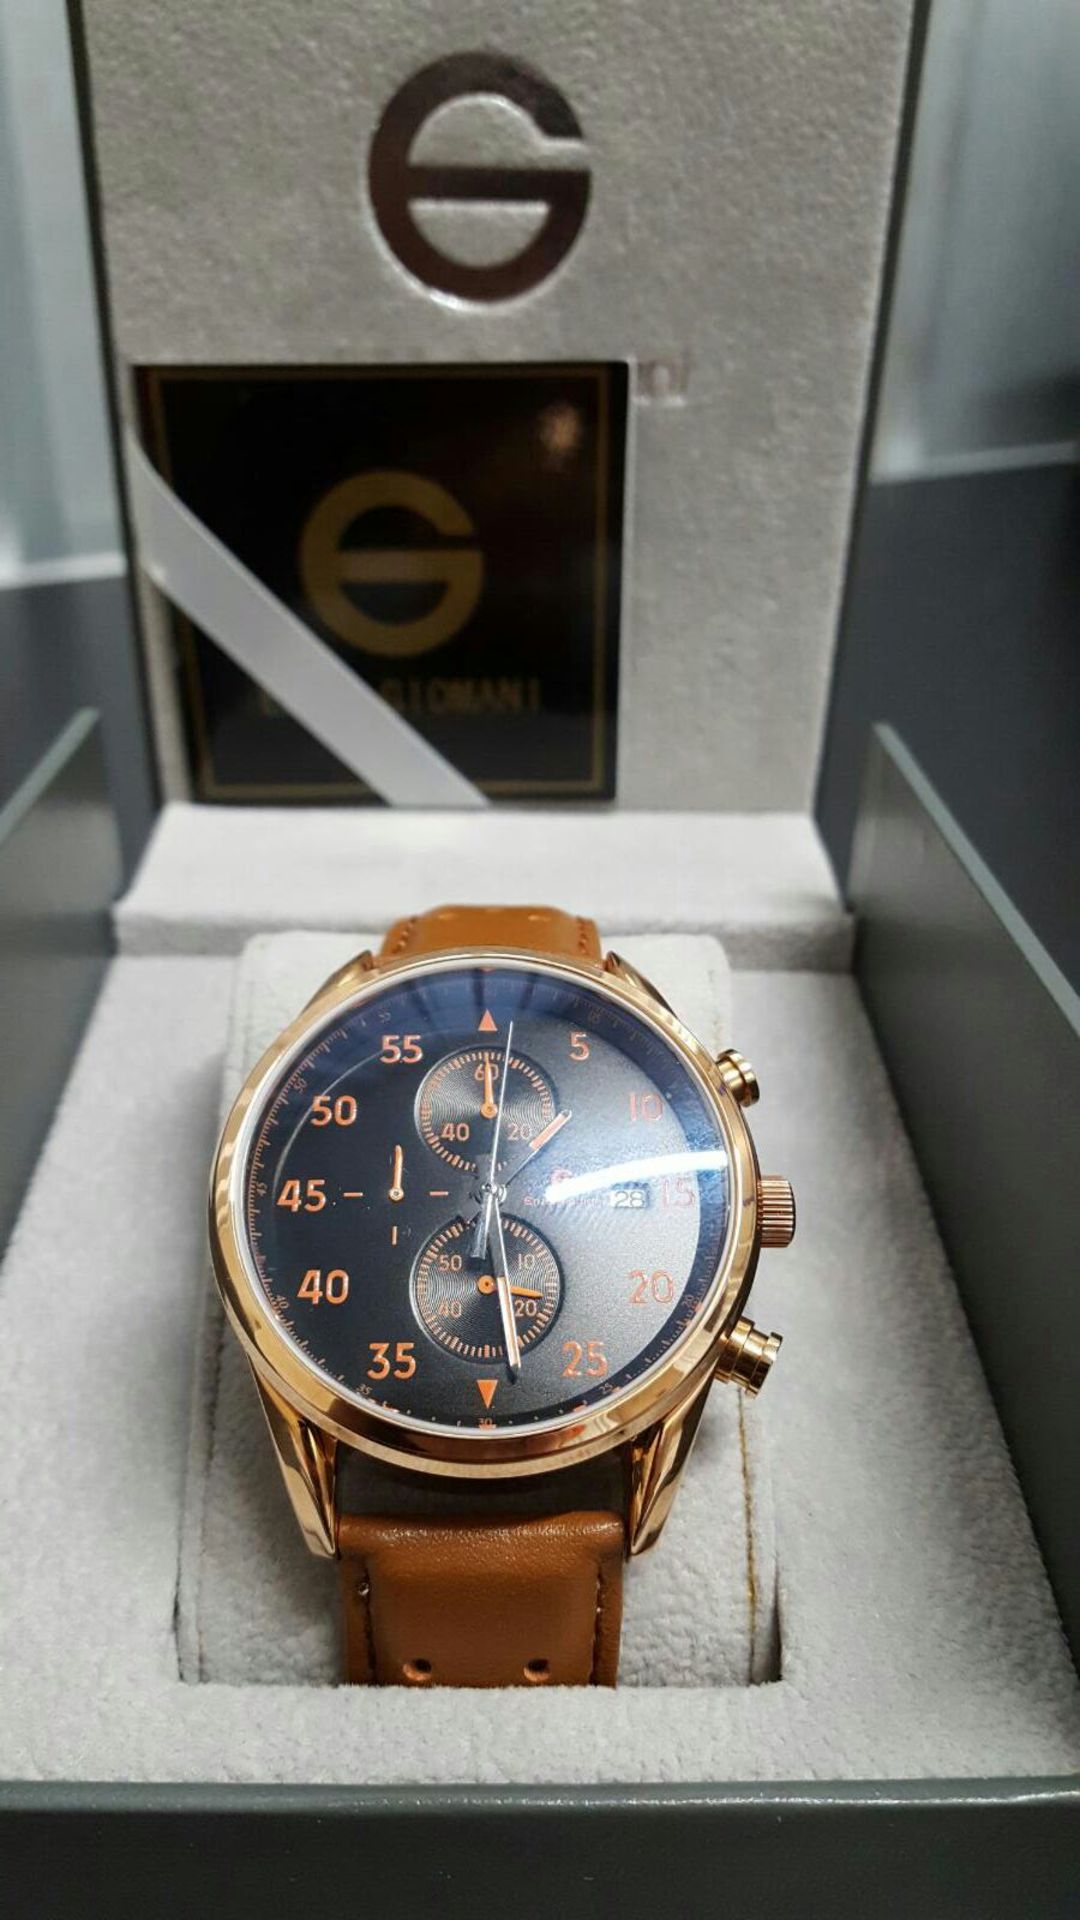 BRAND NEW ENZO GIOMANI EG0027, GENTS ROSE GOLD WITH BLACK FACE, TAN LEATHER STRAP CHRONOGRAPH WATCH, - Image 2 of 2